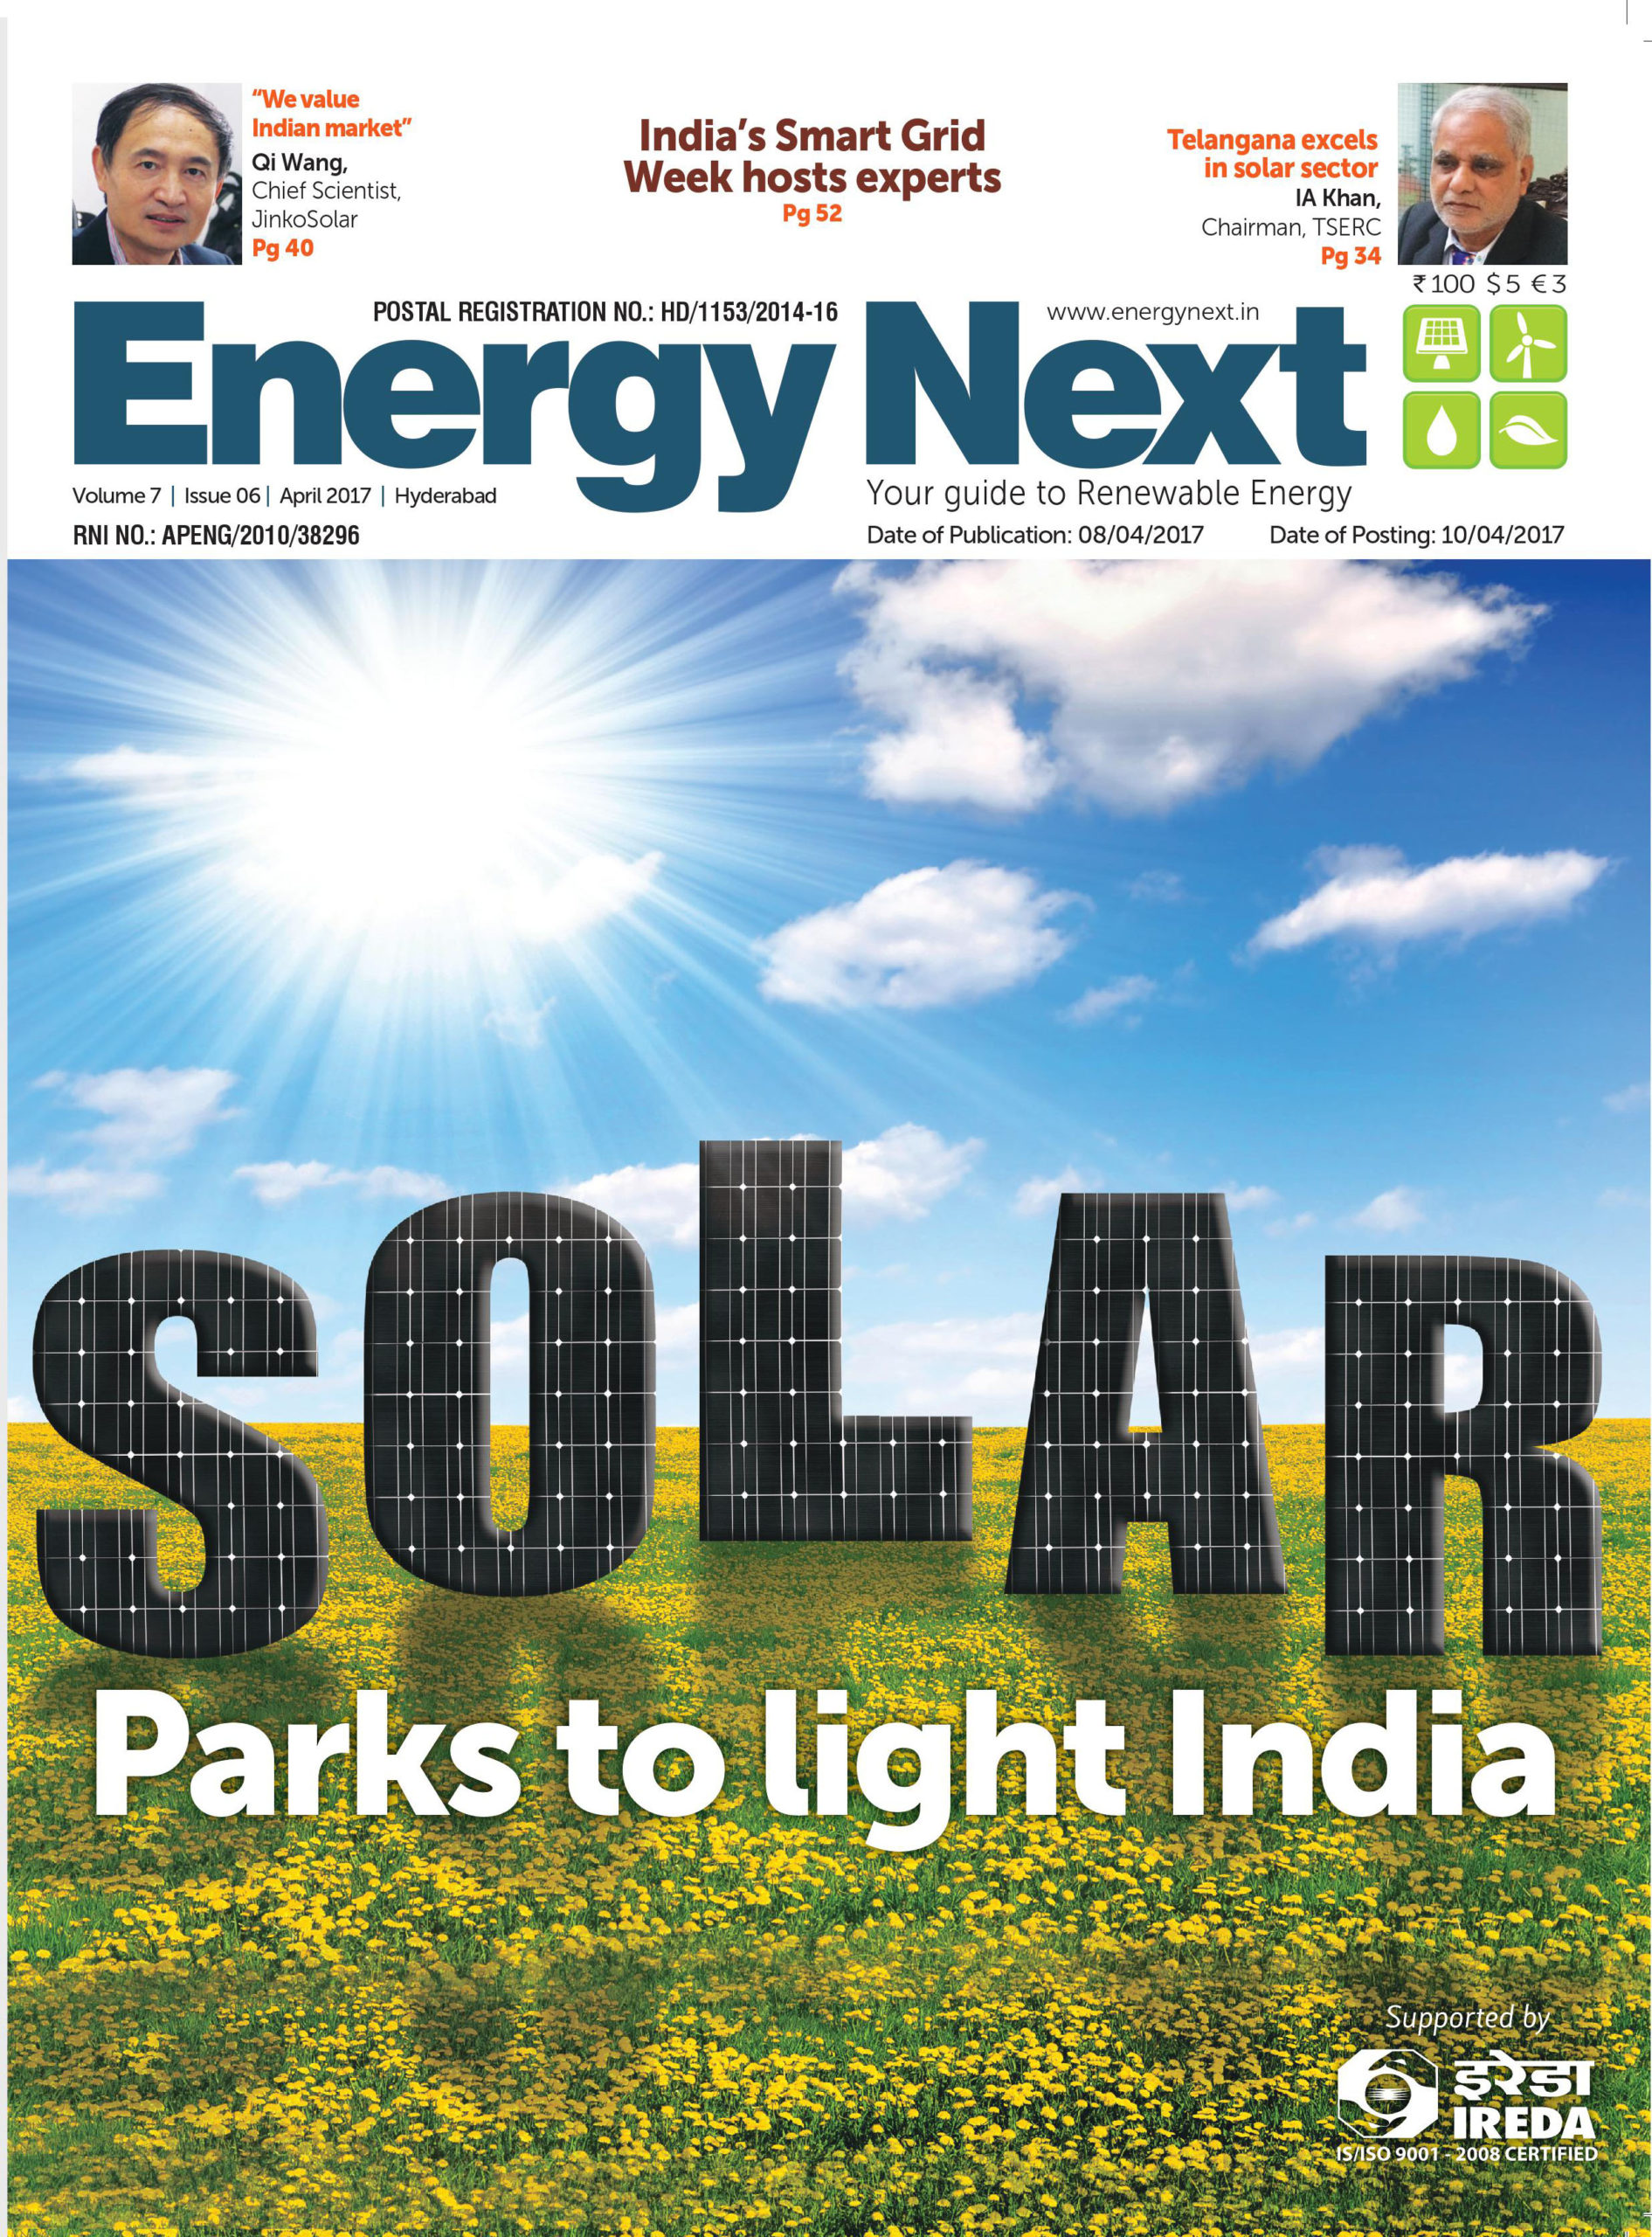 EnergyNext volume 7 issue 6 April 2017 scaled